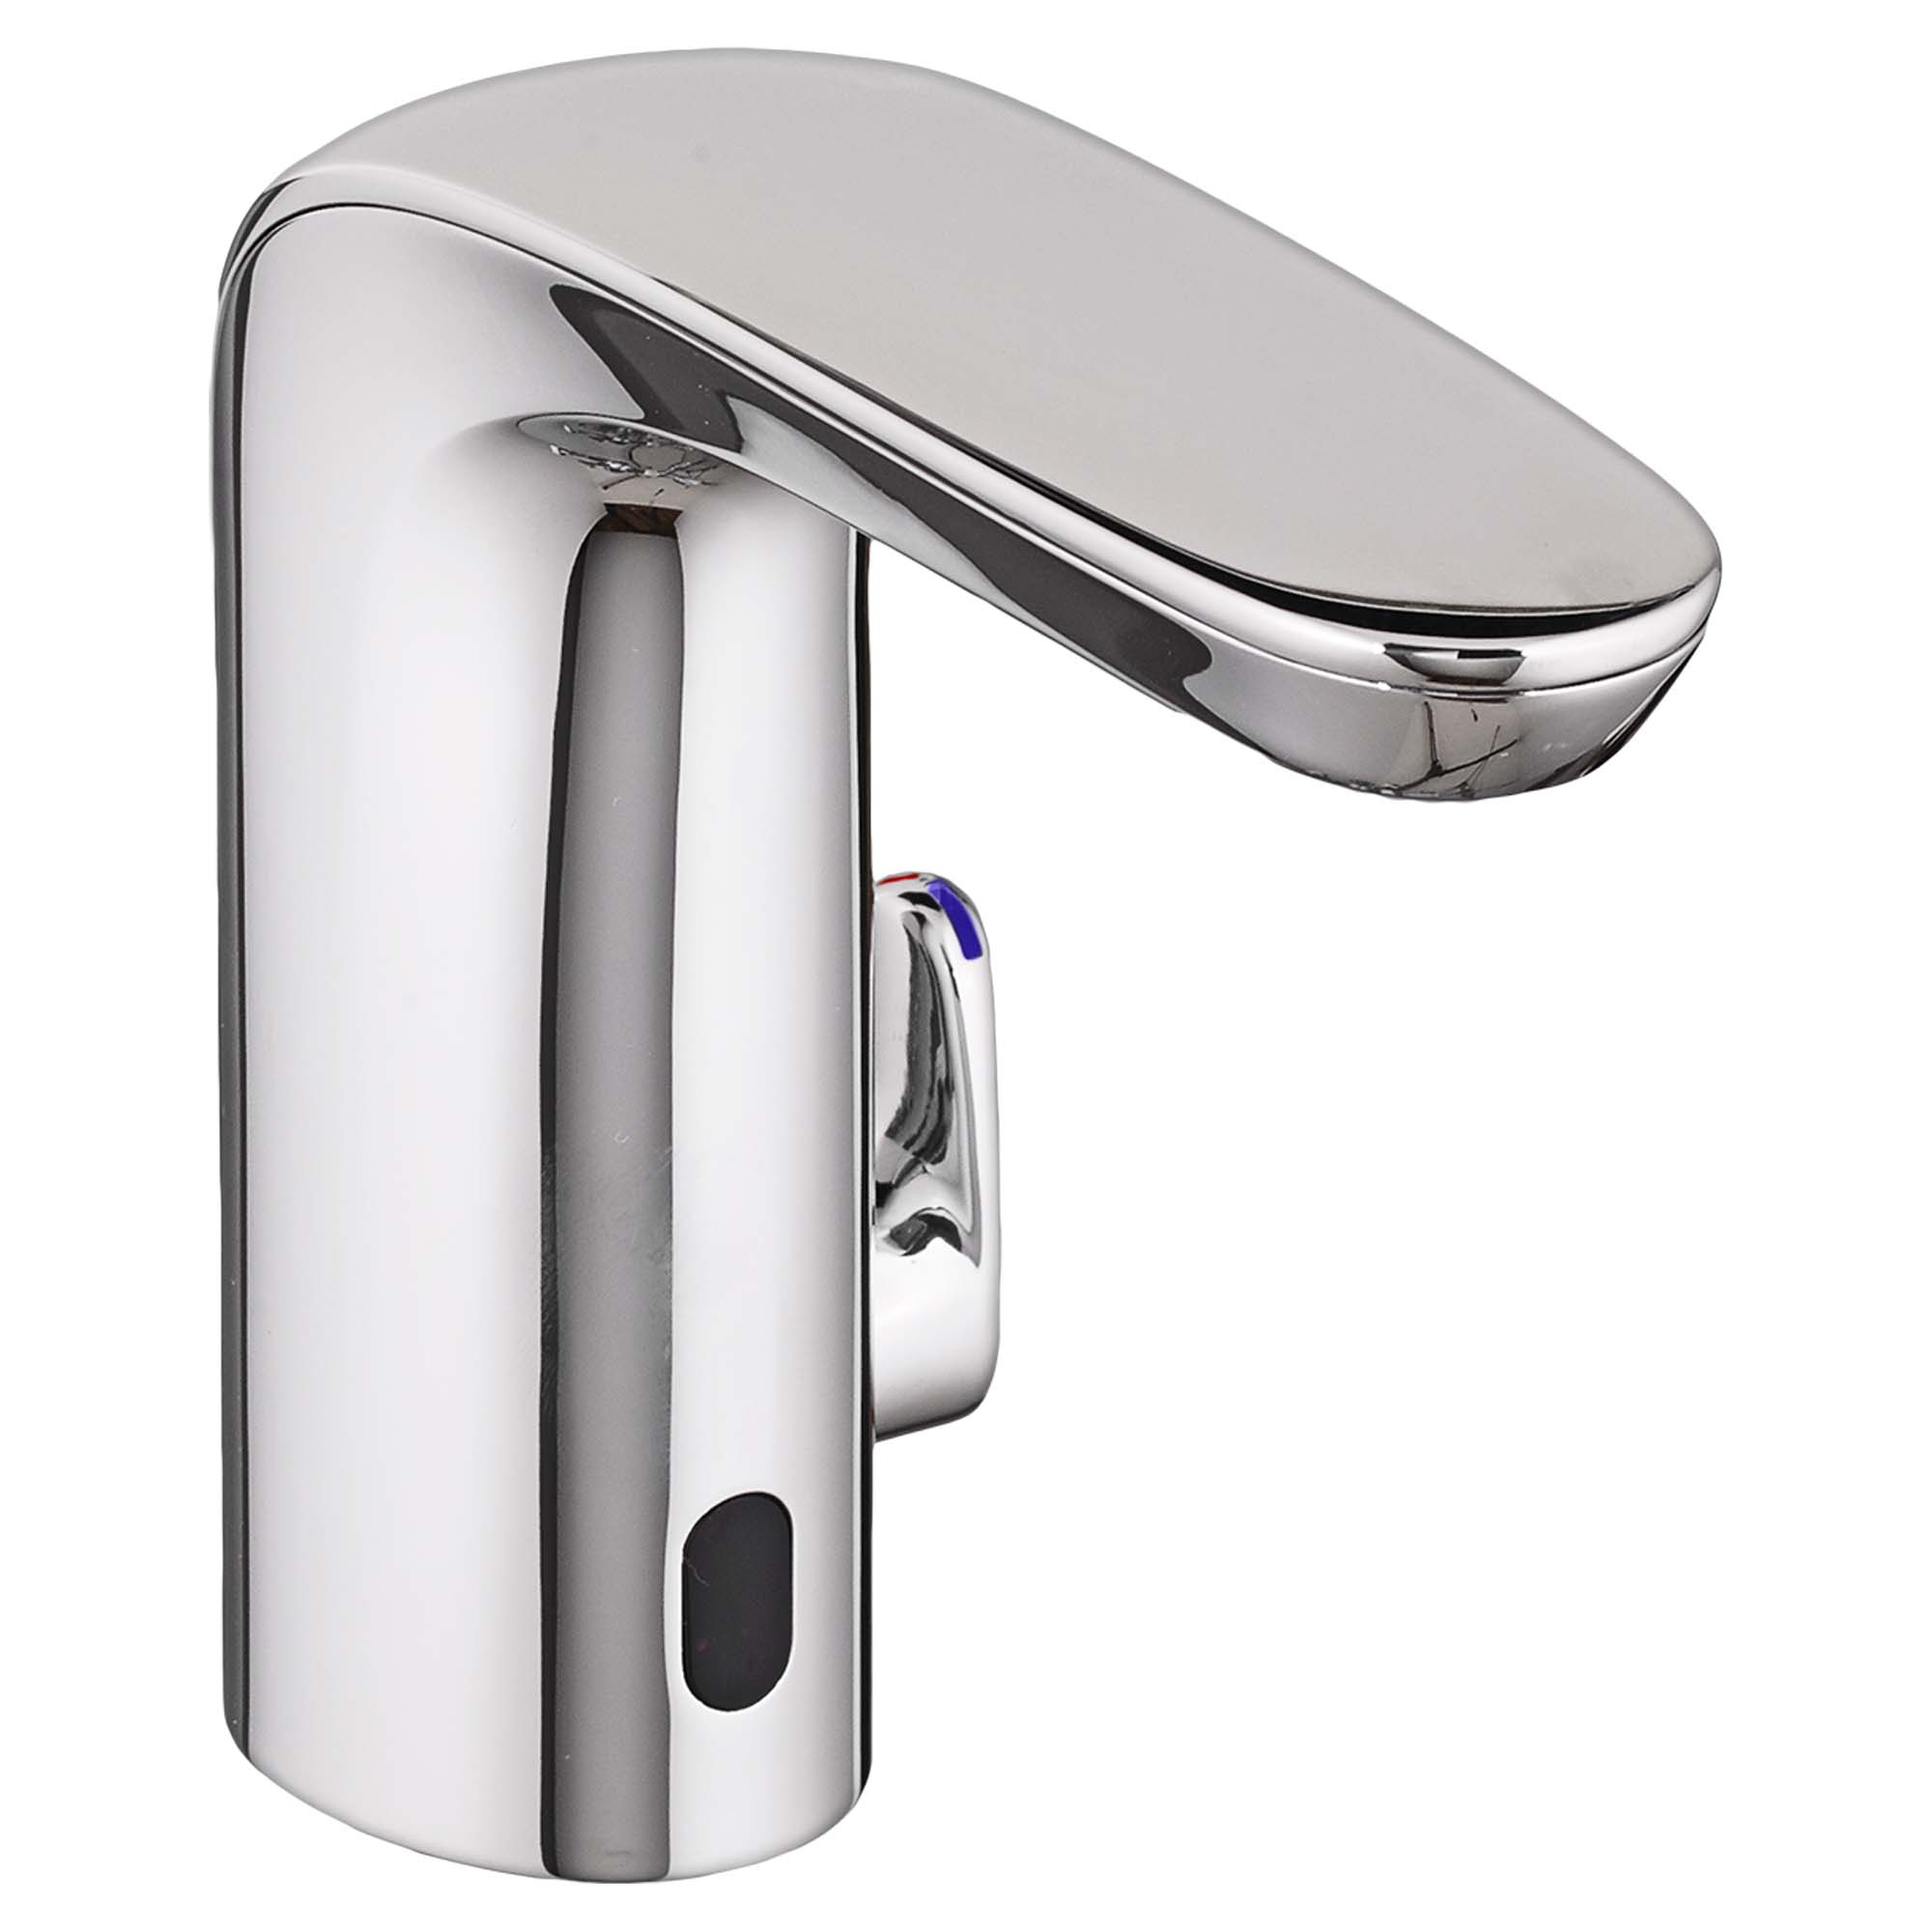 NextGen Selectronic™ Touchless Faucet, Battery-Powered With SmarTherm Safety Shut-Off + ADM, 0.5 gpm/1.9 Lpm